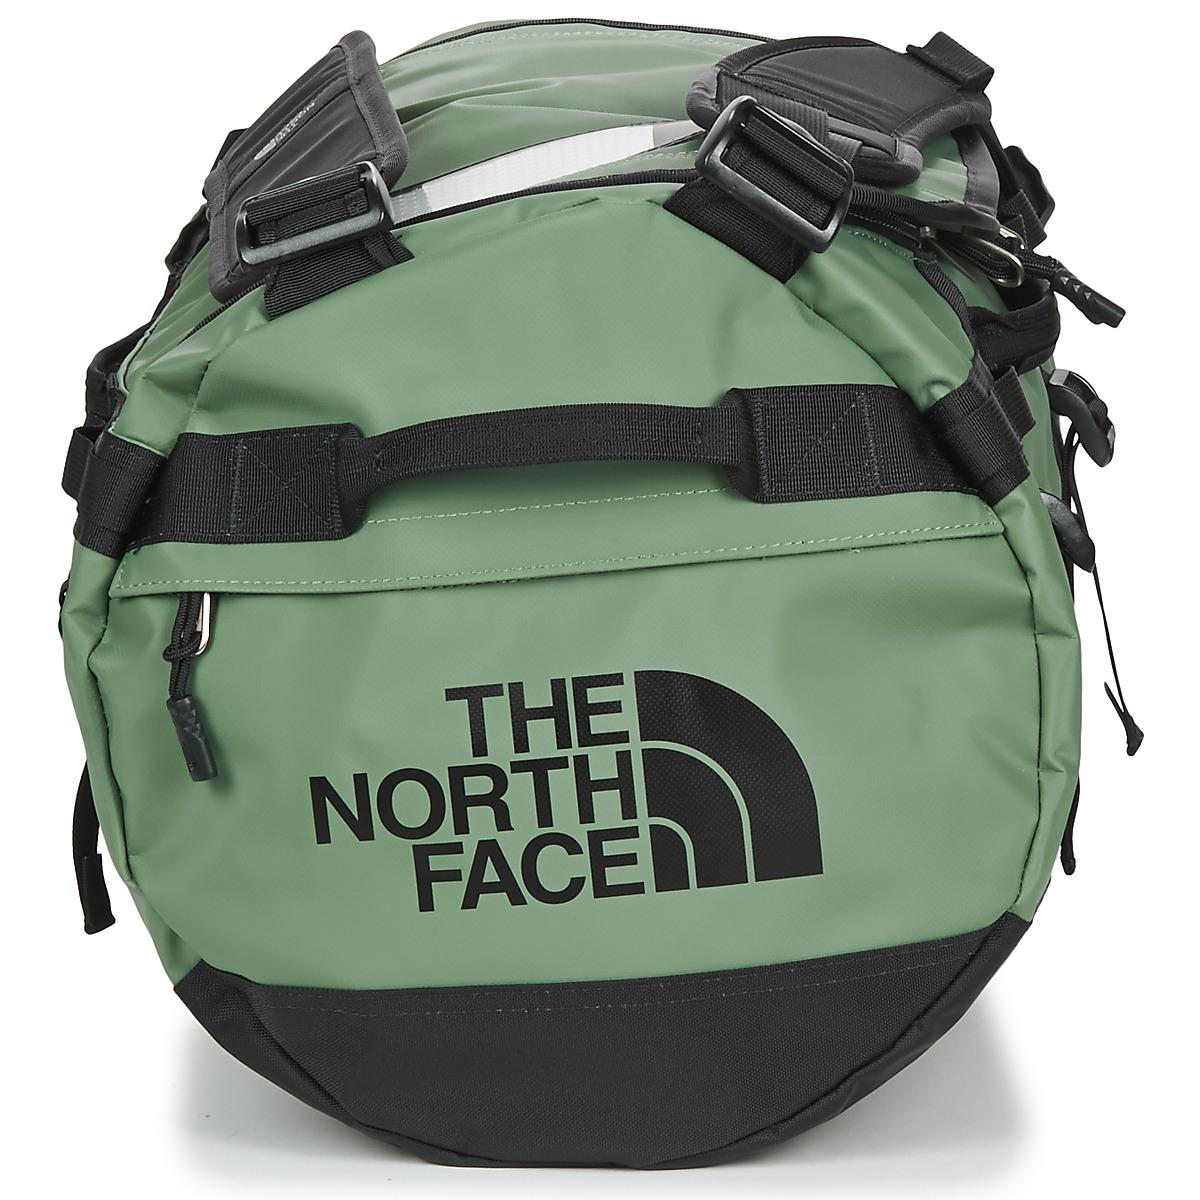 Sac Duffel North Face S Newest Collection, 40% OFF | asrehazir.com